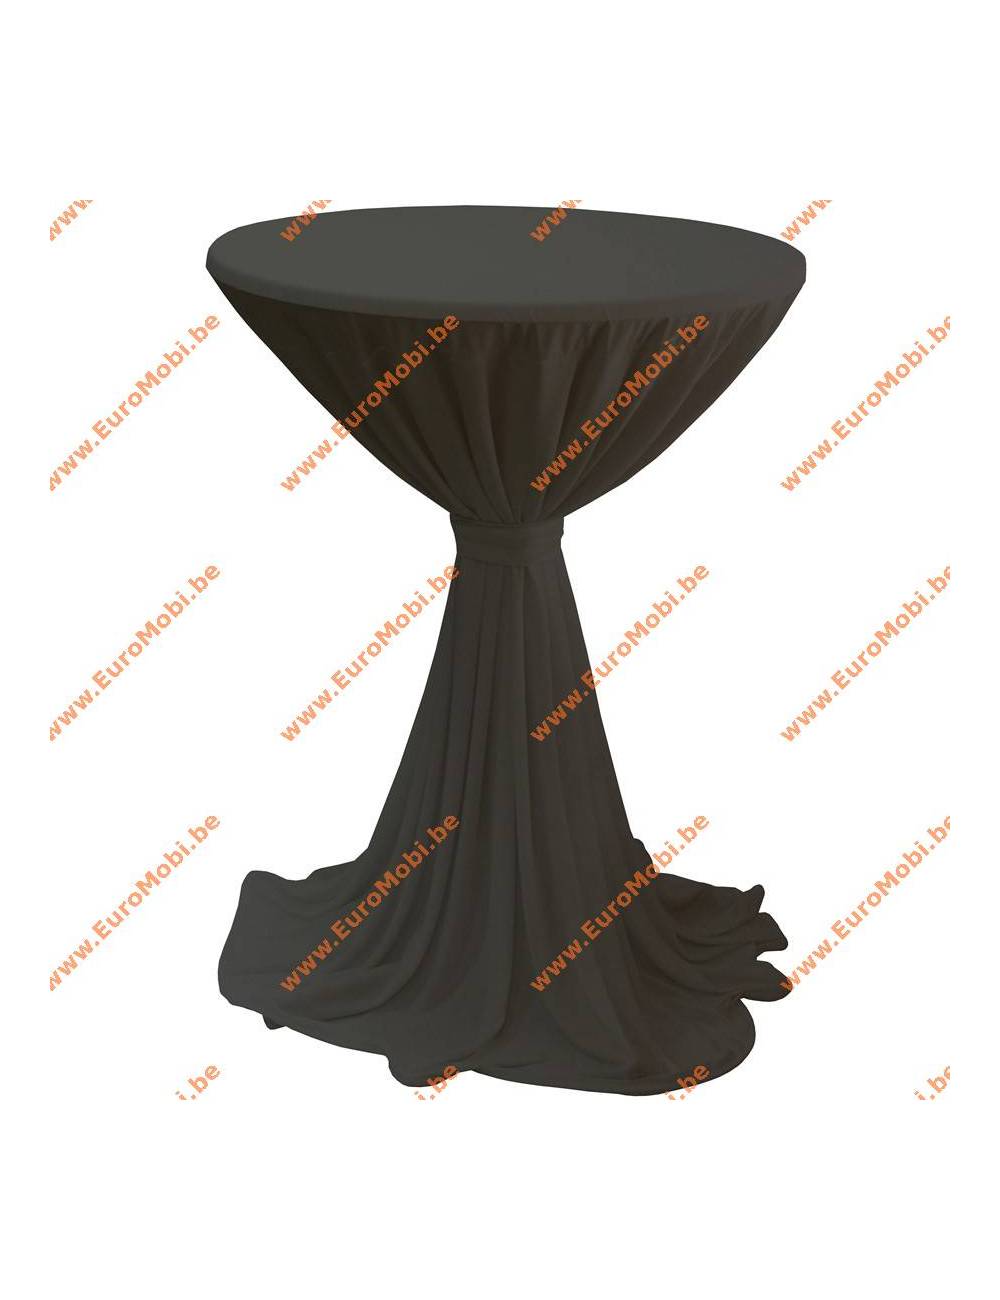 Porto cover and top stretch for standing table round black